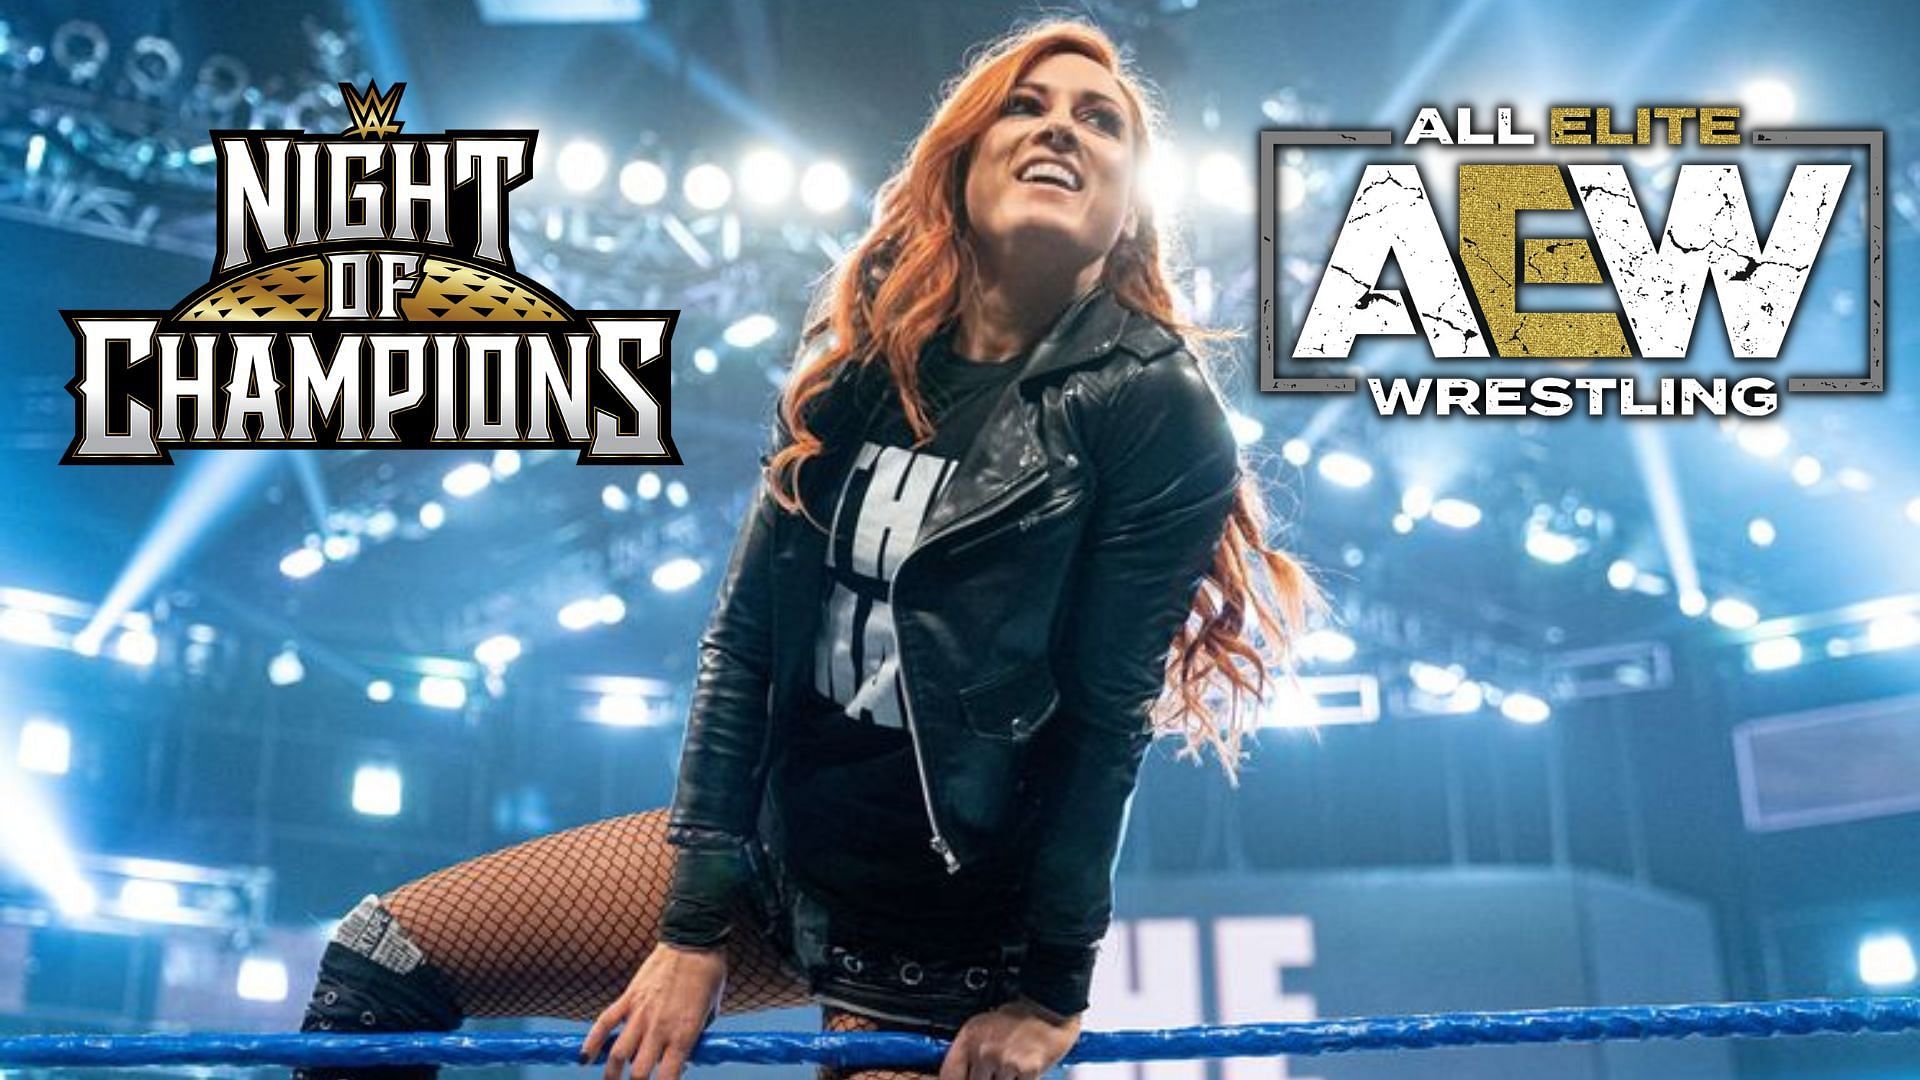 Becky Lynch had a tough fight against Trish Stratus at the Night of Champions